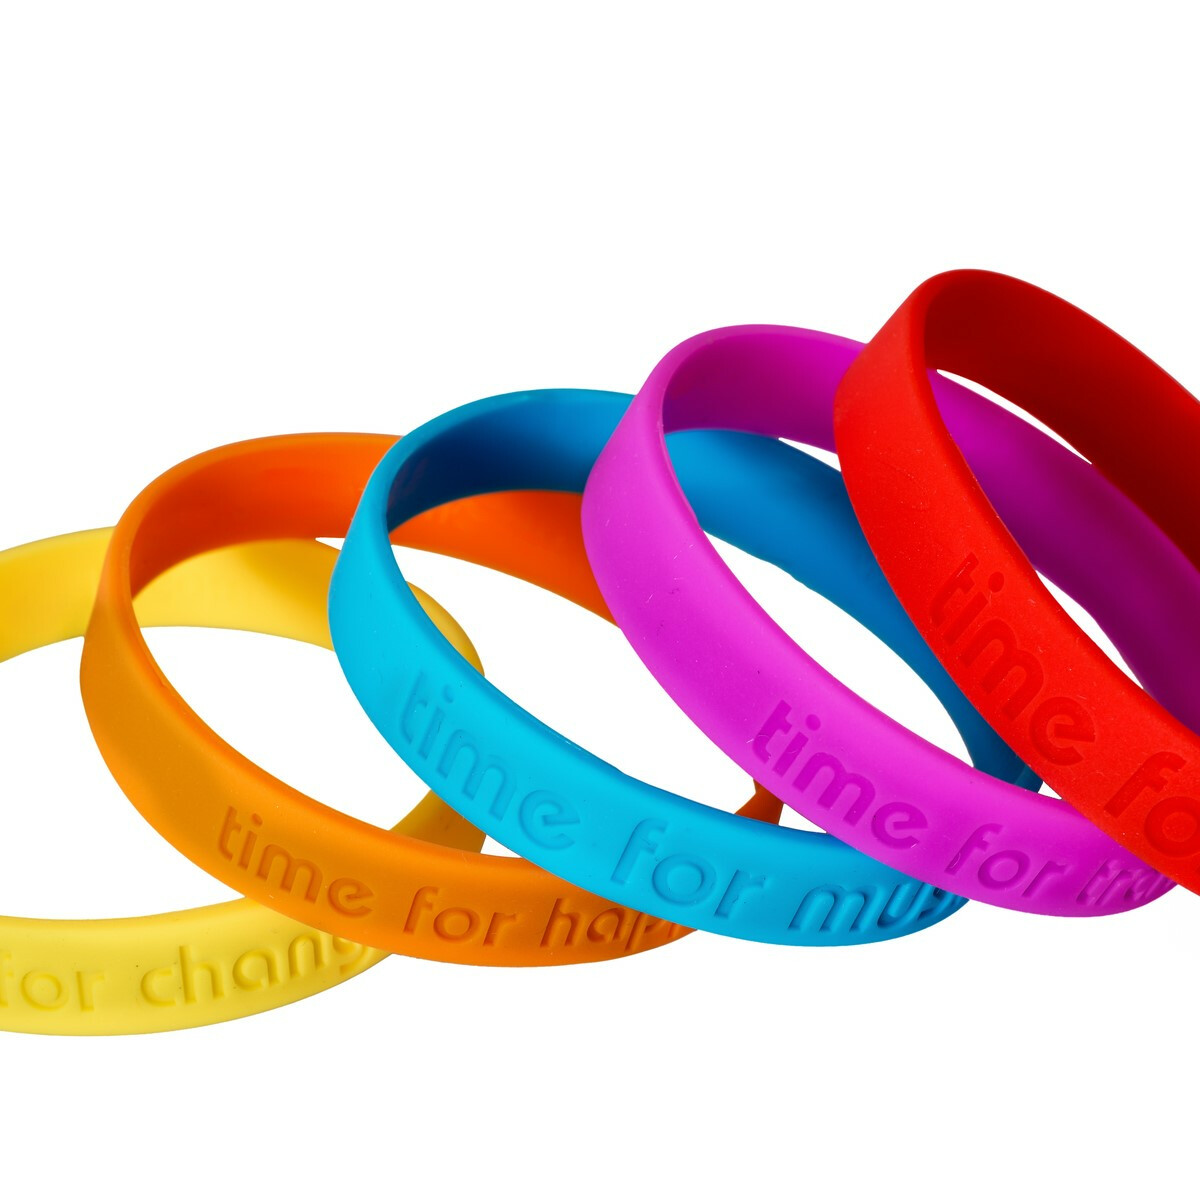 Raising Funds for Relief Efforts? Consider Custom Wristbands